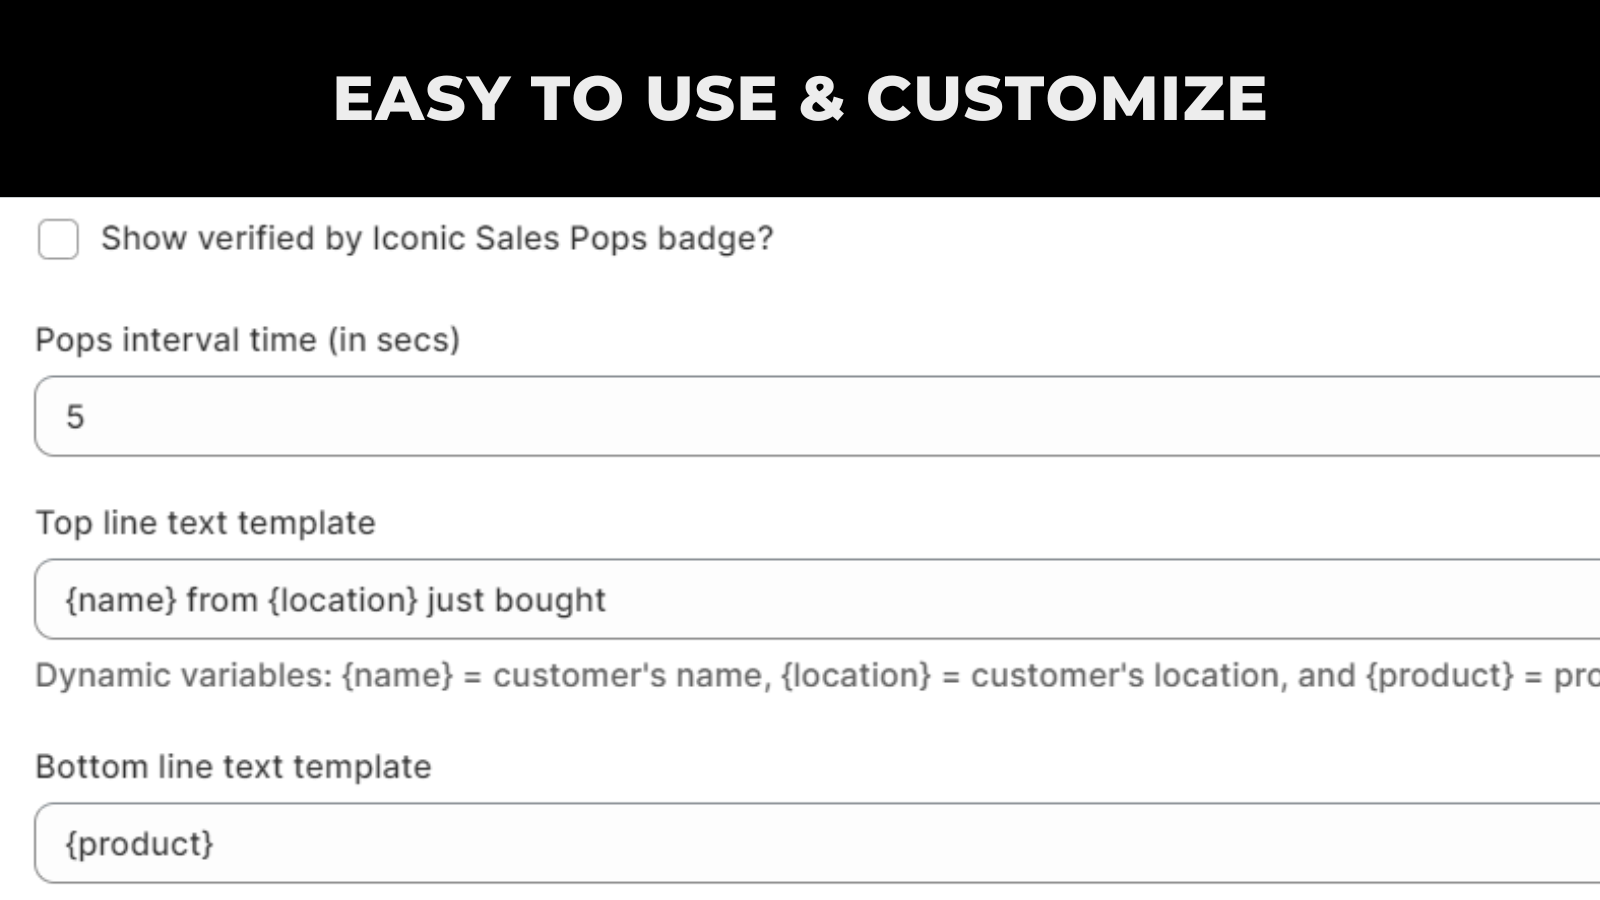 Iconic sales pops - easy to use